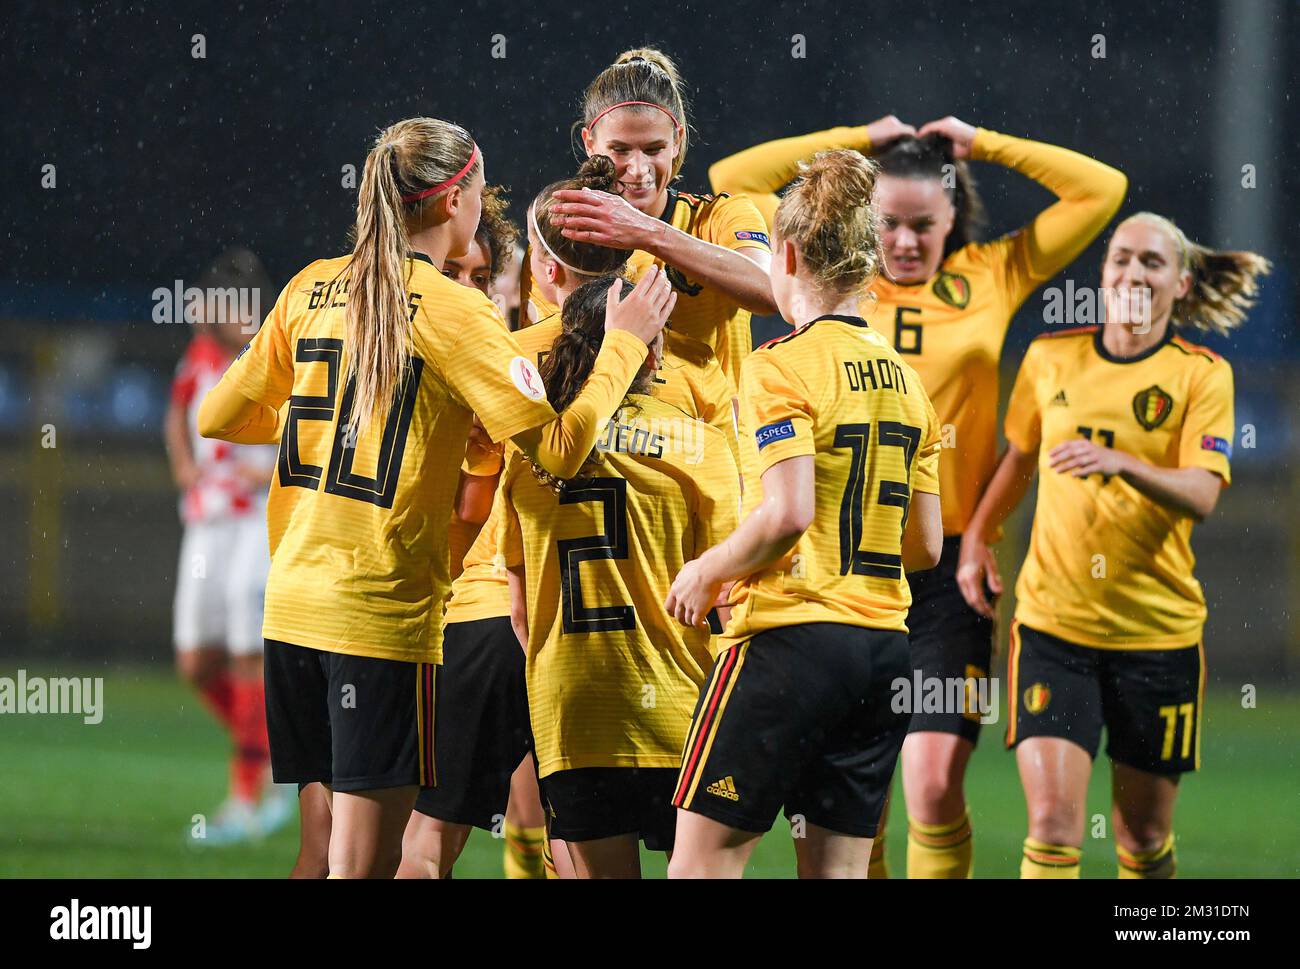 Belgian players celebrate after scoring during a soccer game between Croatia and Belgium's Red Flames, Friday 08 November 2019 in Zapresic, Croatia, the third out of 8 qualification games for the women's Euro 2021 European Championships. BELGA PHOTO DAVID CATRY Stock Photo